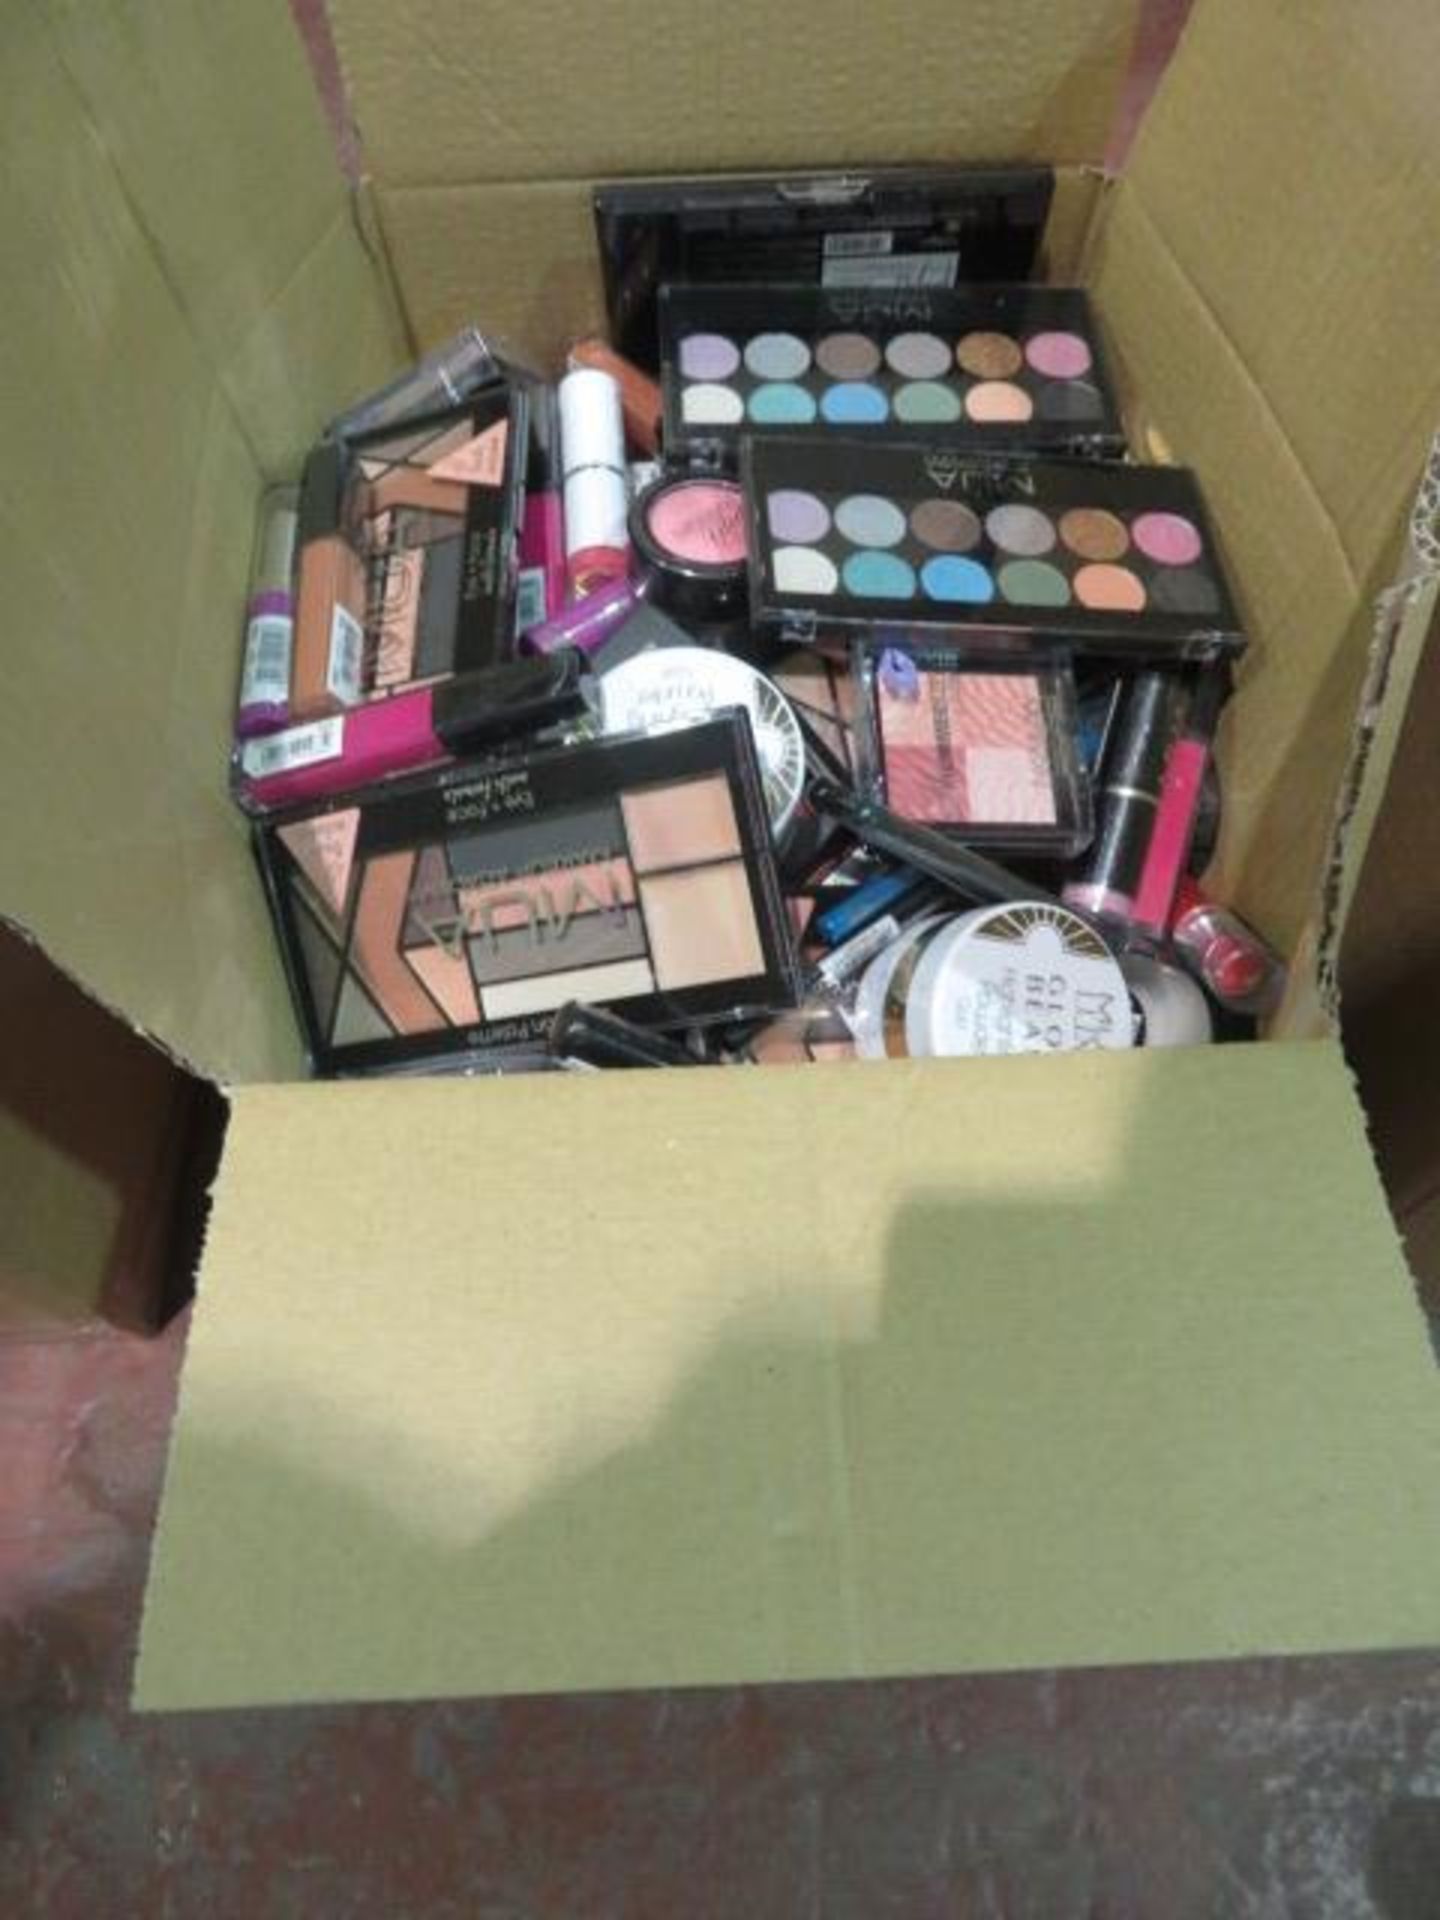 Circa. 200 items of various new make up acadamy make up to include: eye+face devotion eyeshadow... - Image 2 of 2